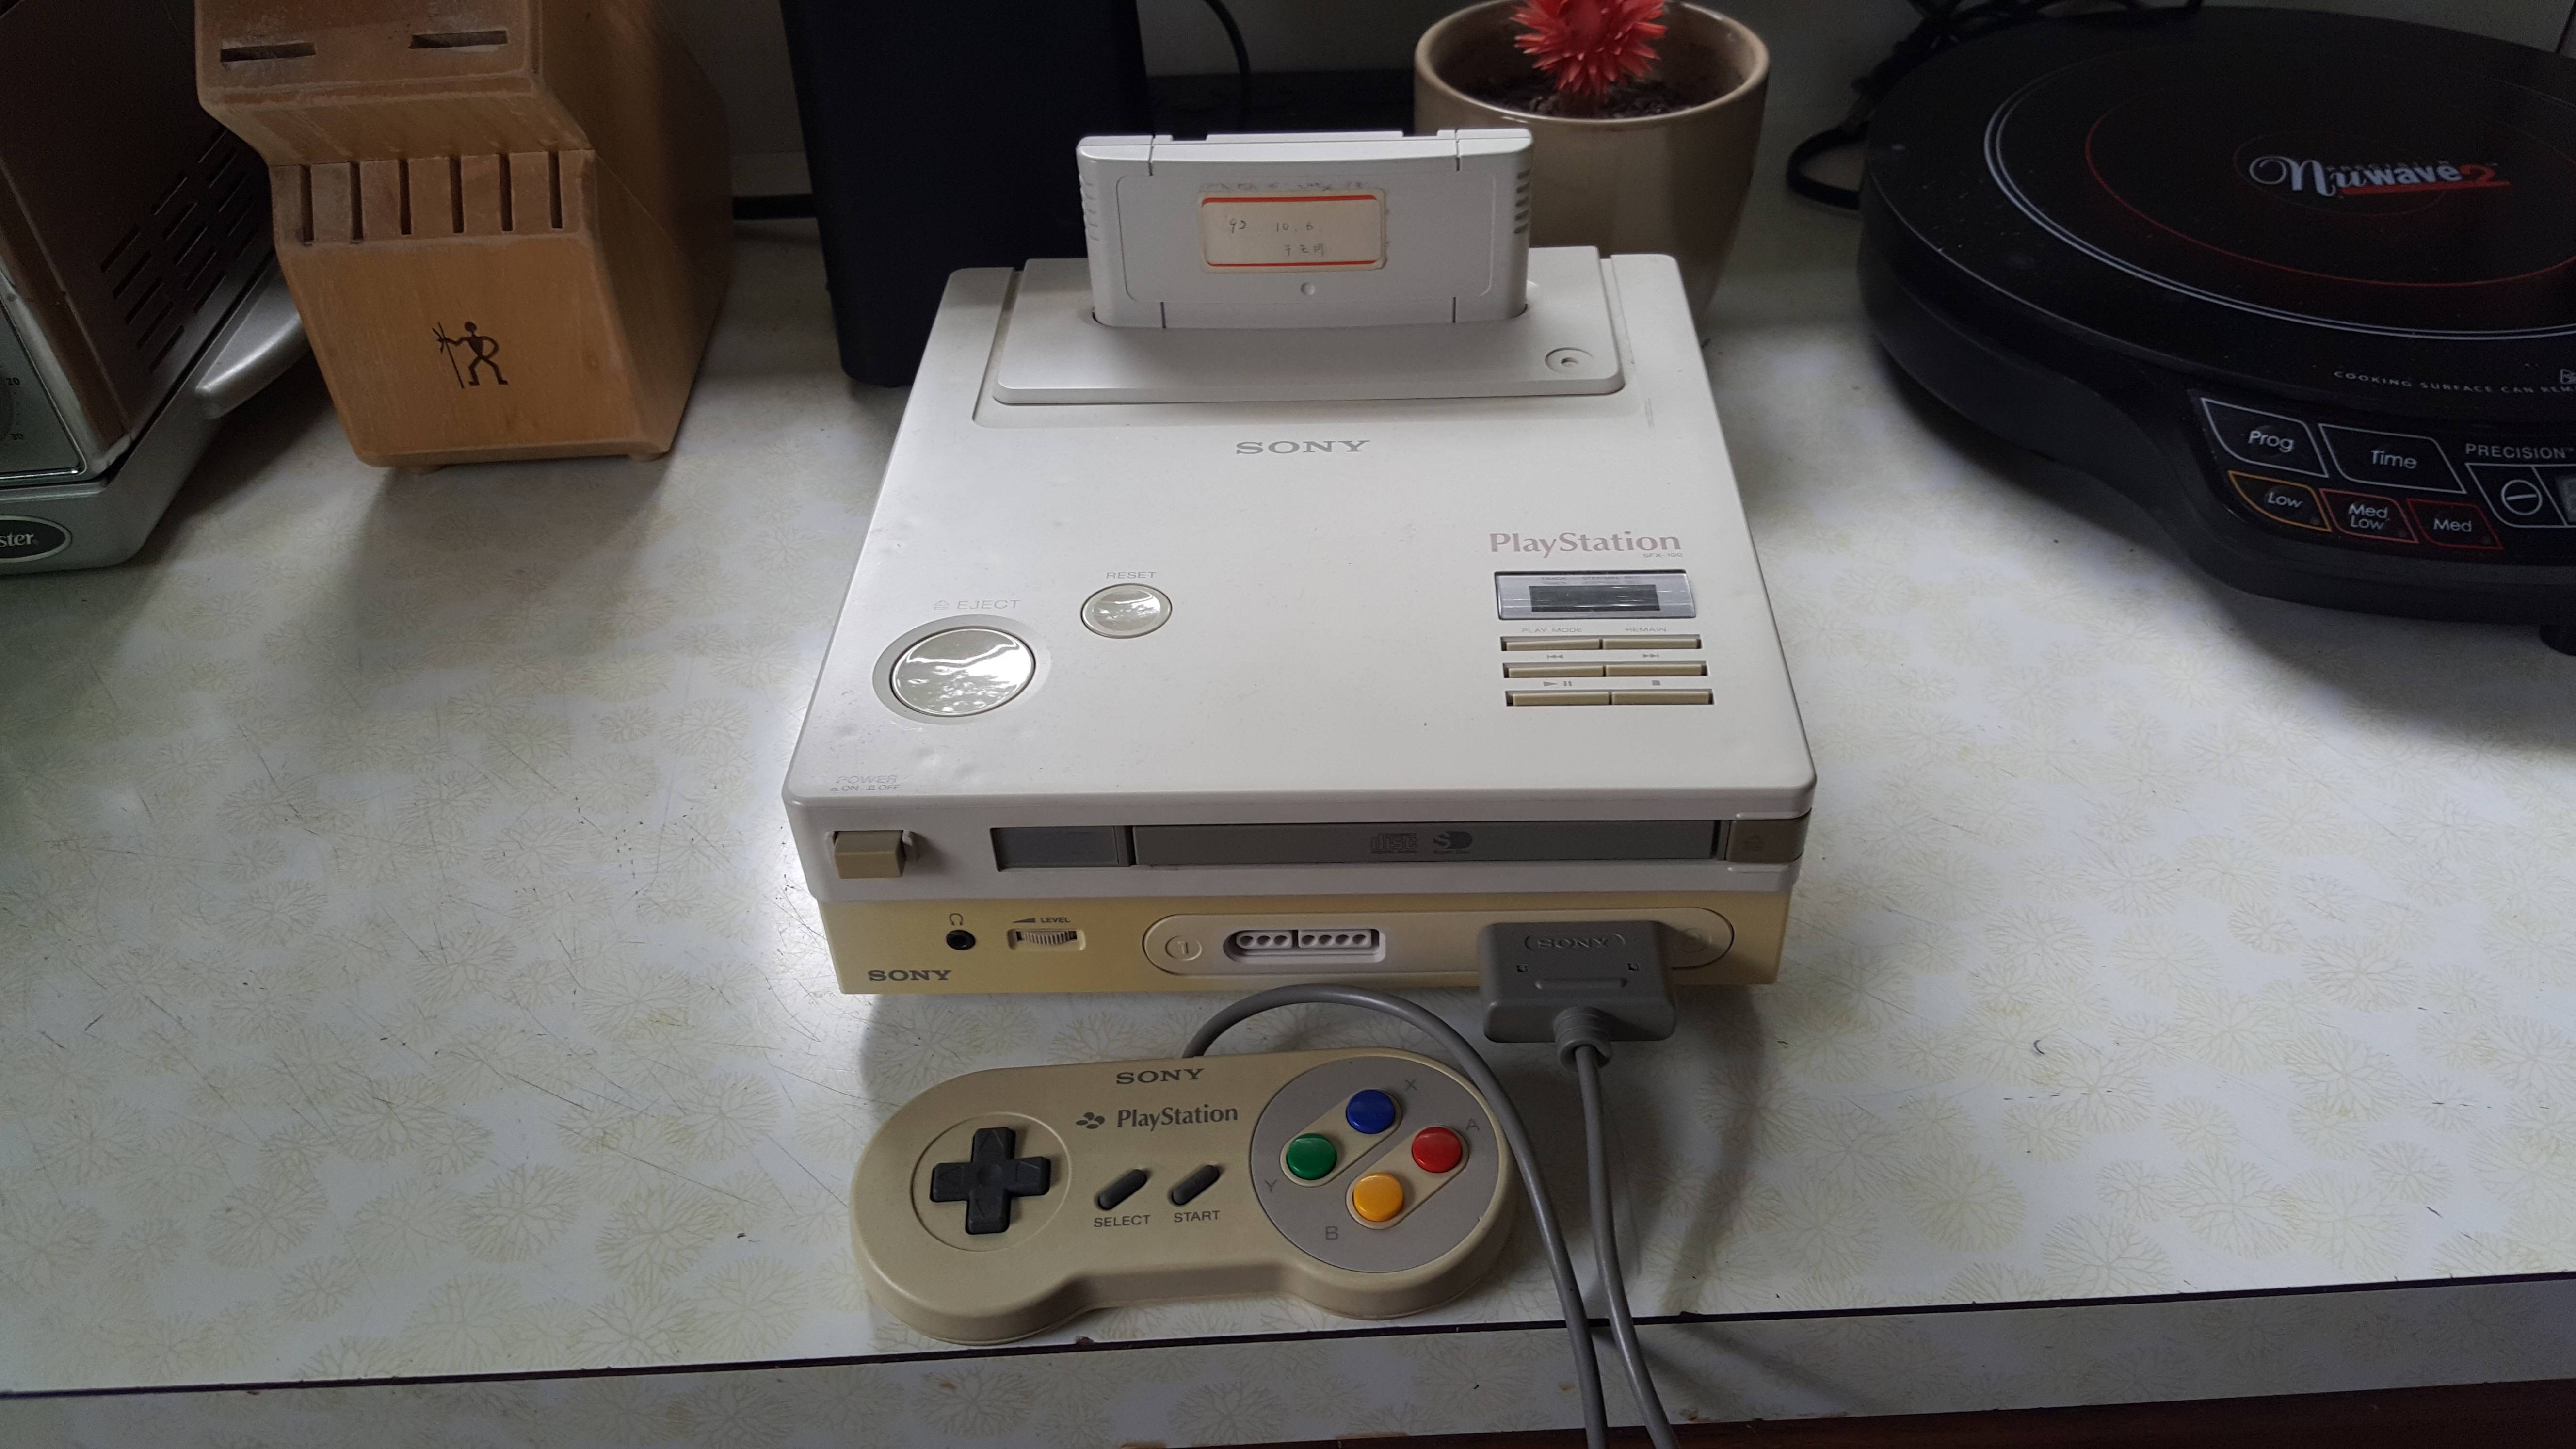 Prototype for Nintendo/Sony’s Console Surface - Lost History at It's Finest